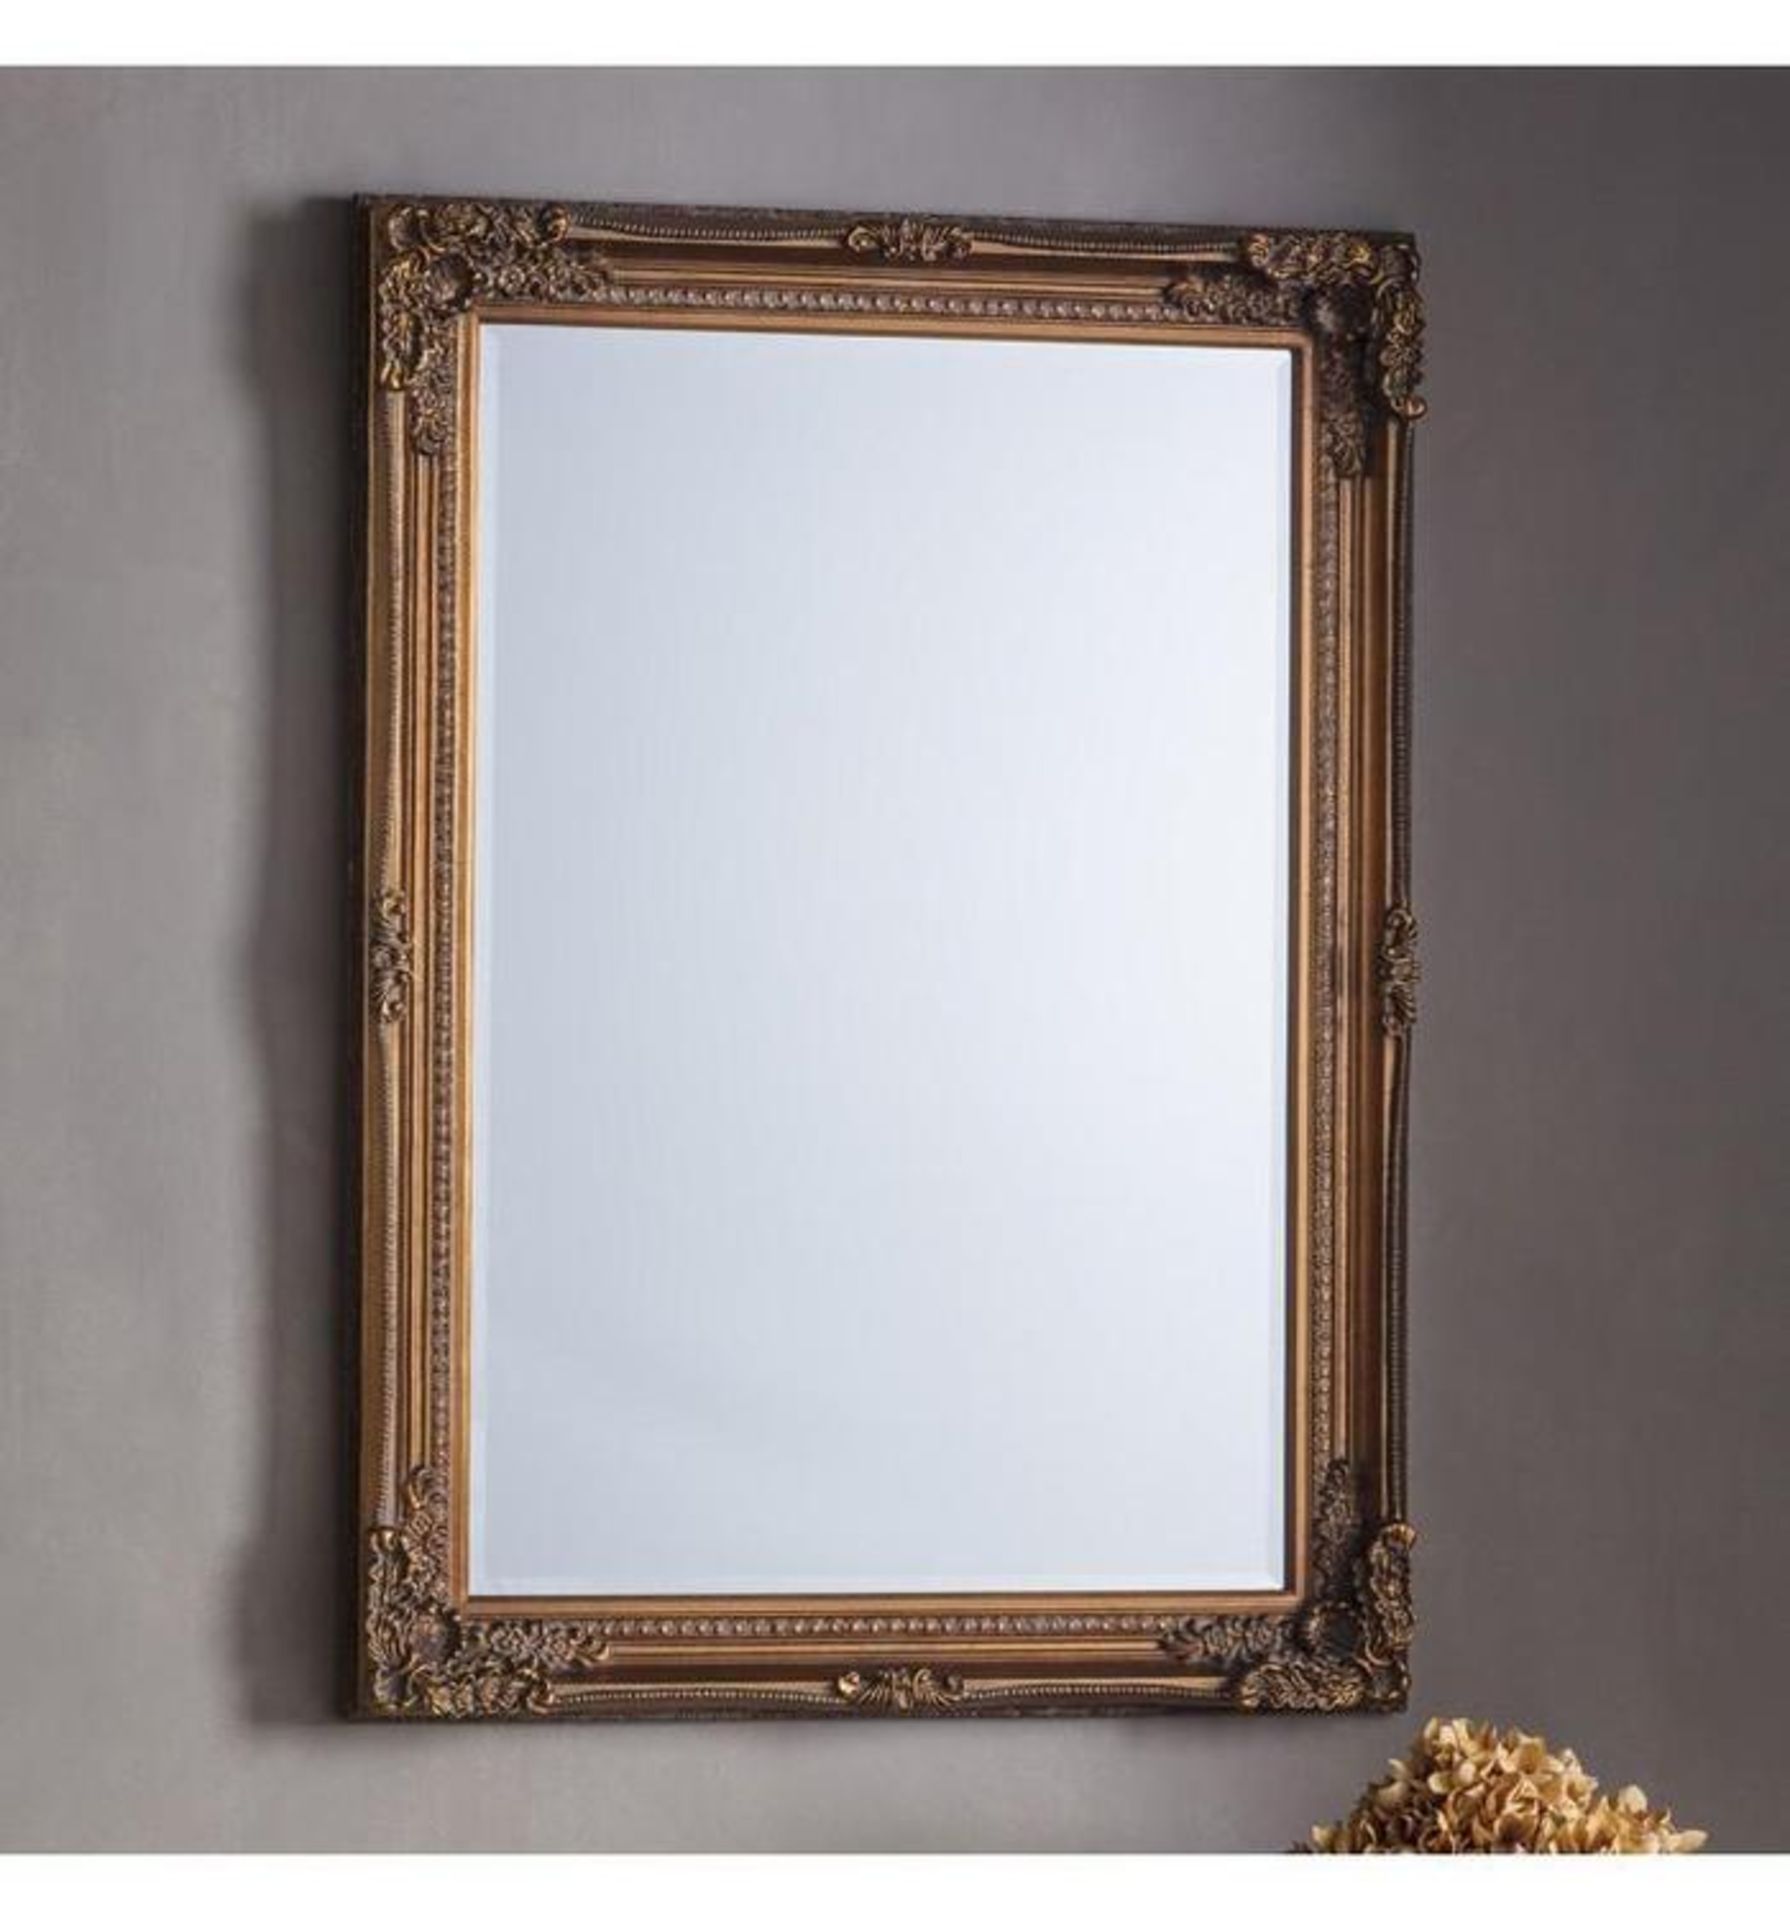 Rushden Bronze Rectangle Mirror 780x75x1080mm An ornate, baroque inspired wall mirror in an aged